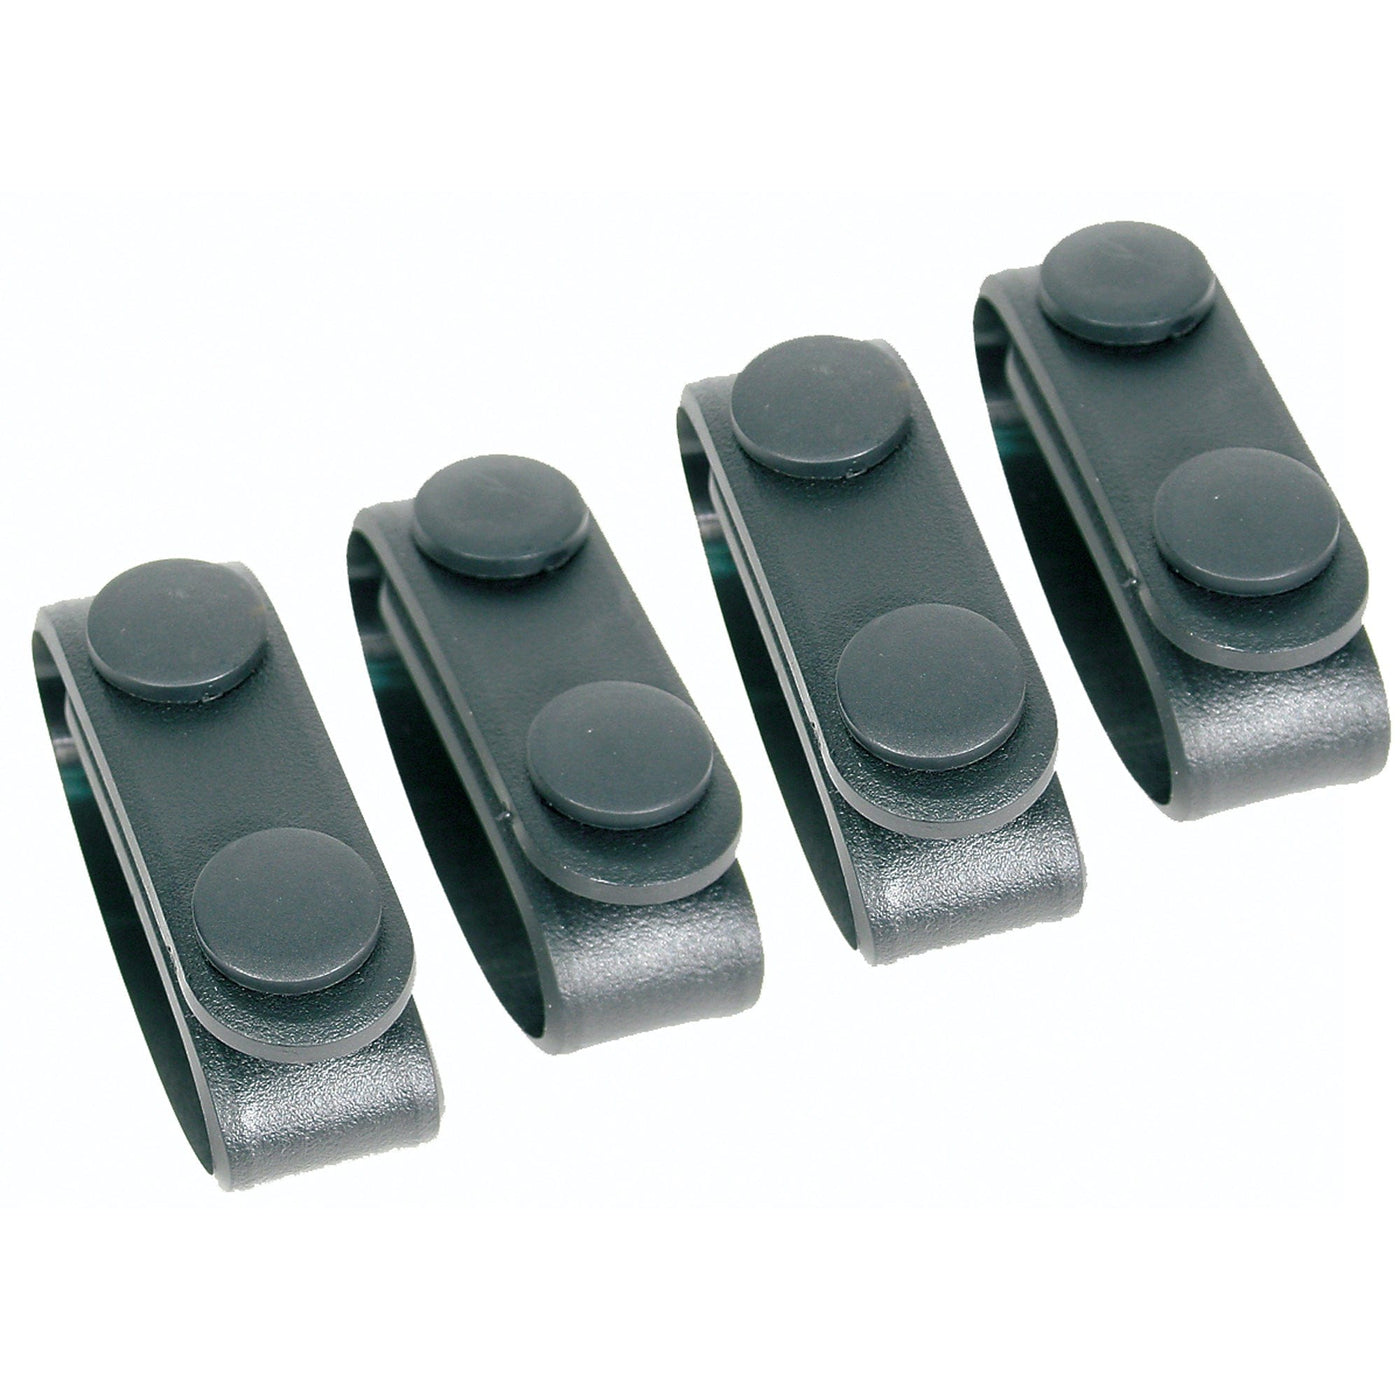 BLACKHAWK Bh Molded Blt Keepers (4) Blk Clothing